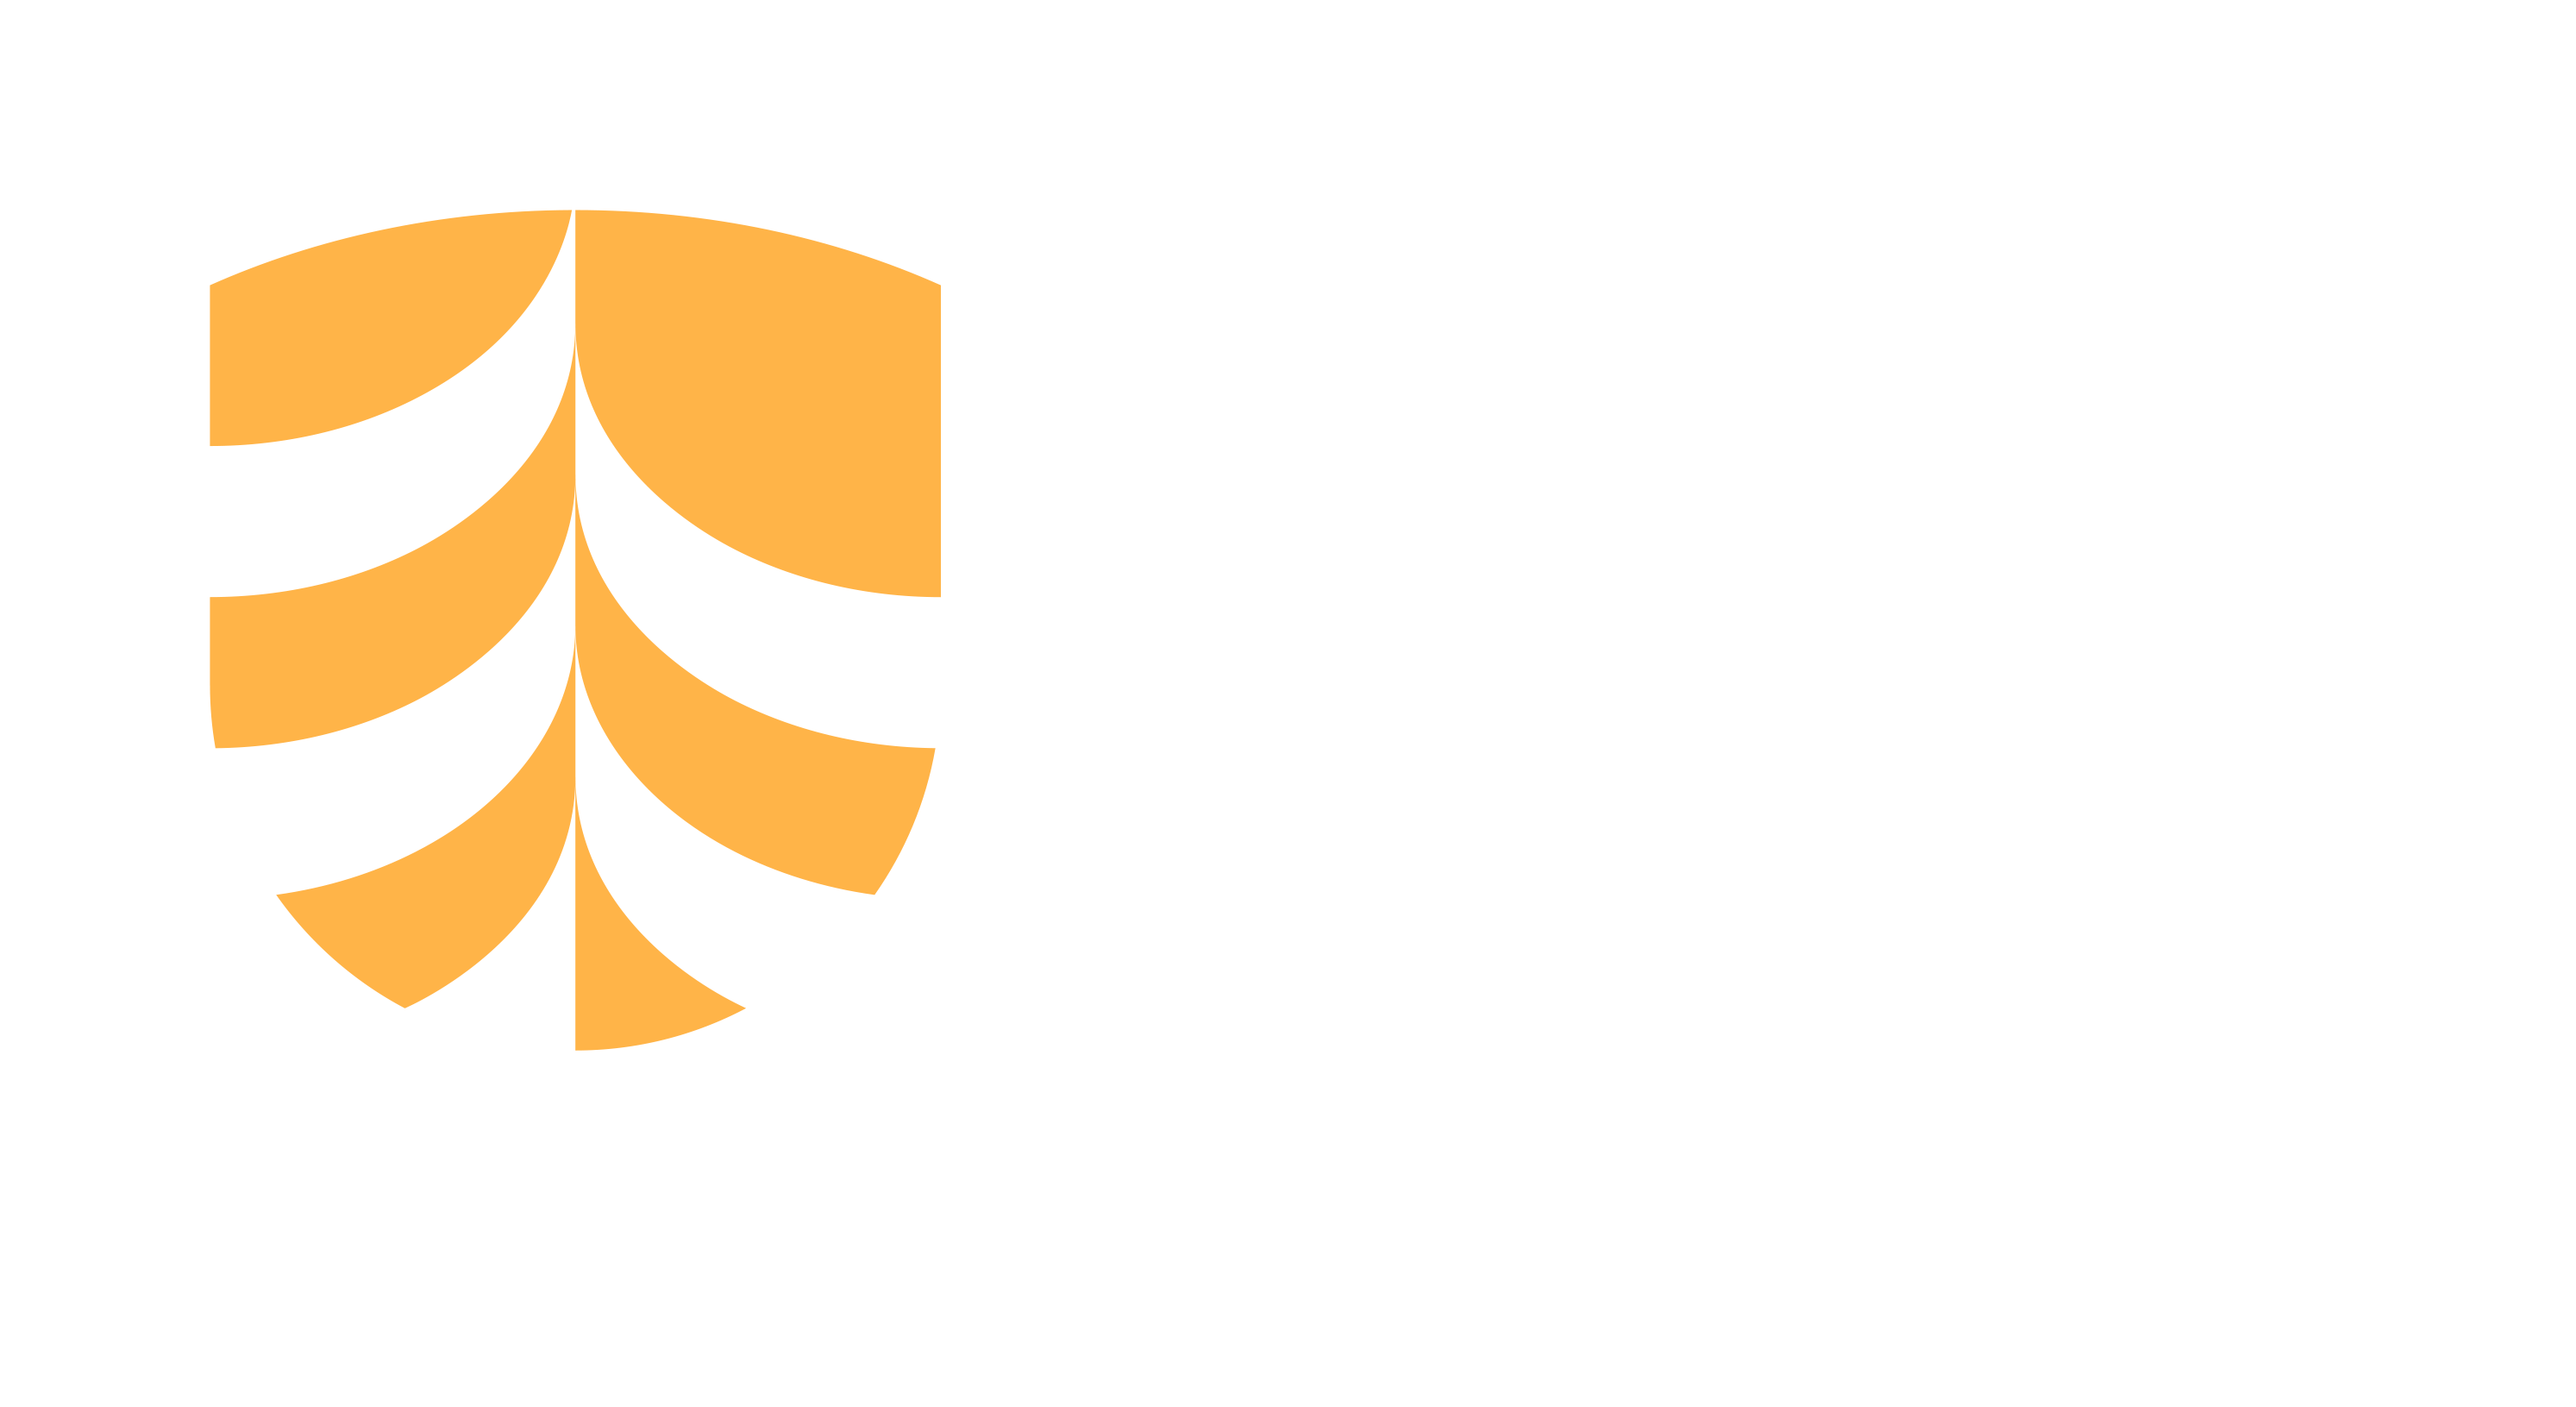 University of Southern Queensland - Logo